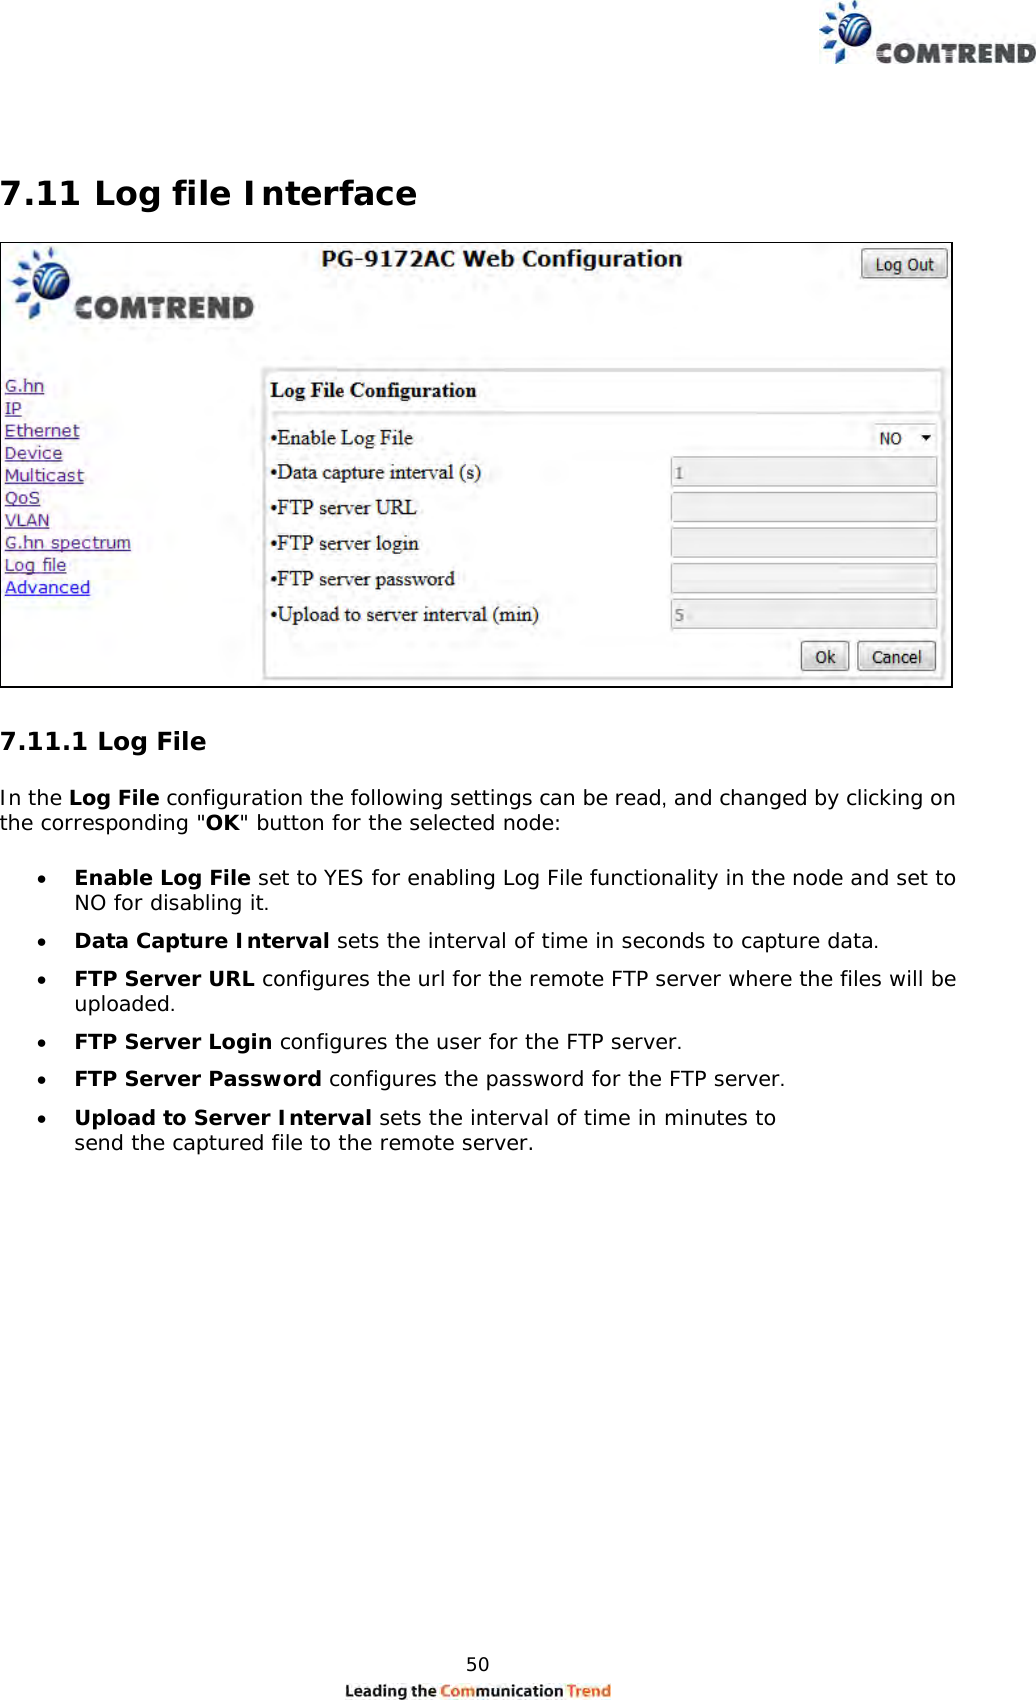  50   7.11 Log file Interface   7.11.1 Log File  In the Log File configuration the following settings can be read, and changed by clicking on the corresponding &quot;OK&quot; button for the selected node:   Enable Log File set to YES for enabling Log File functionality in the node and set to NO for disabling it.   Data Capture Interval sets the interval of time in seconds to capture data.   FTP Server URL configures the url for the remote FTP server where the files will be uploaded.   FTP Server Login configures the user for the FTP server.   FTP Server Password configures the password for the FTP server.   Upload to Server Interval sets the interval of time in minutes to send the captured file to the remote server. 